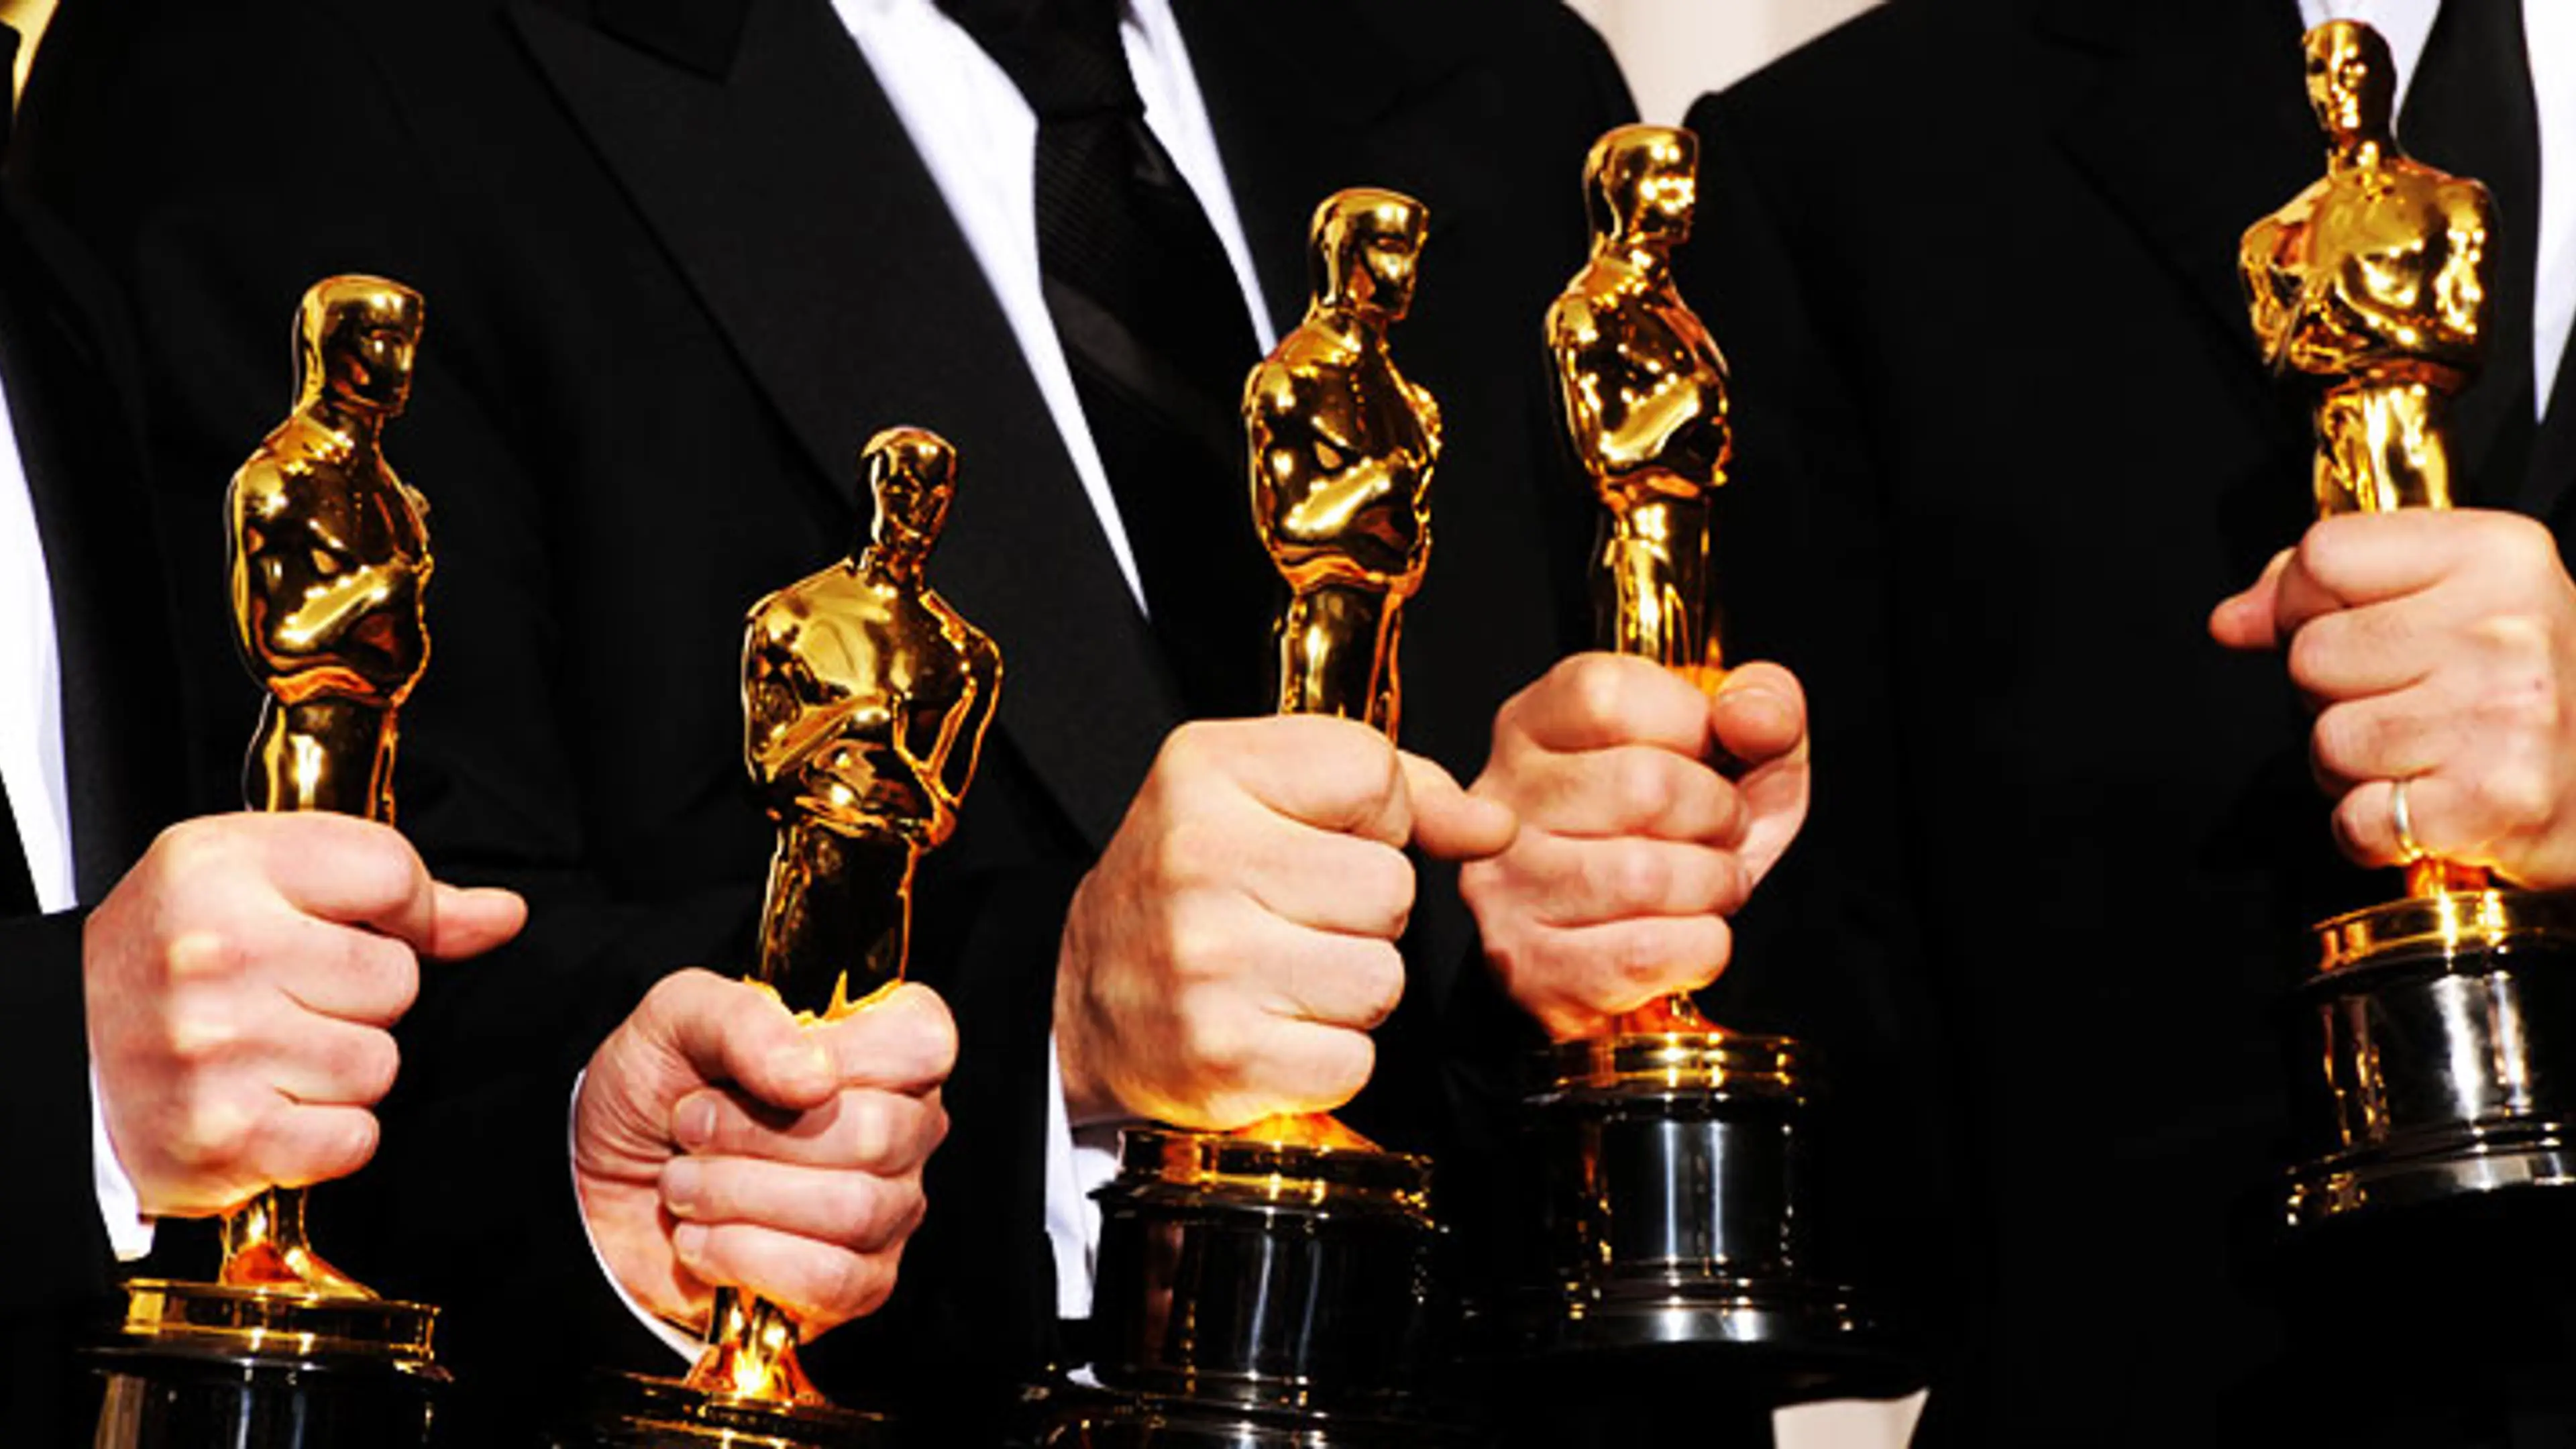 6 Oscar-nominated movies that entrepreneurs can draw inspiration from